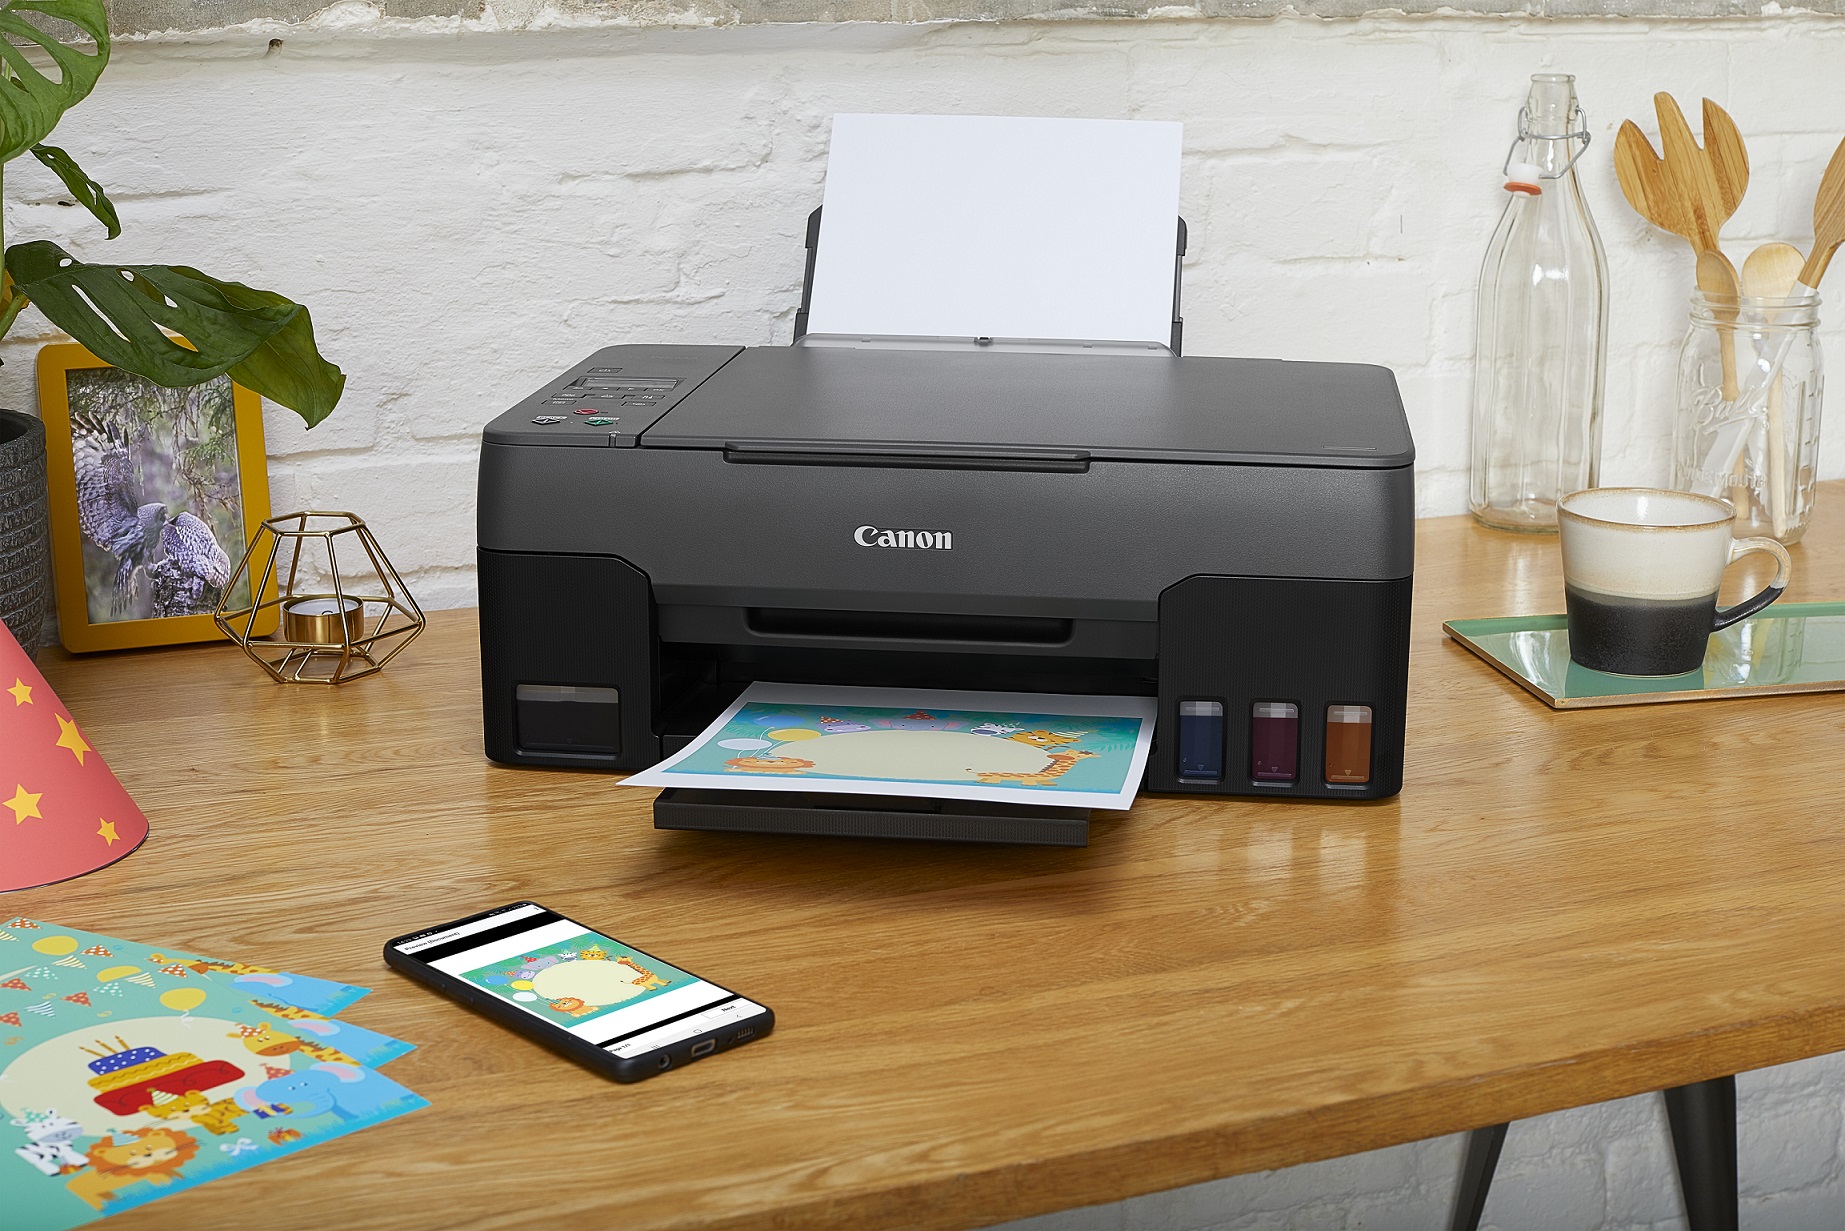 Canon expands Pixma range with five entry-level printers - ITP.net